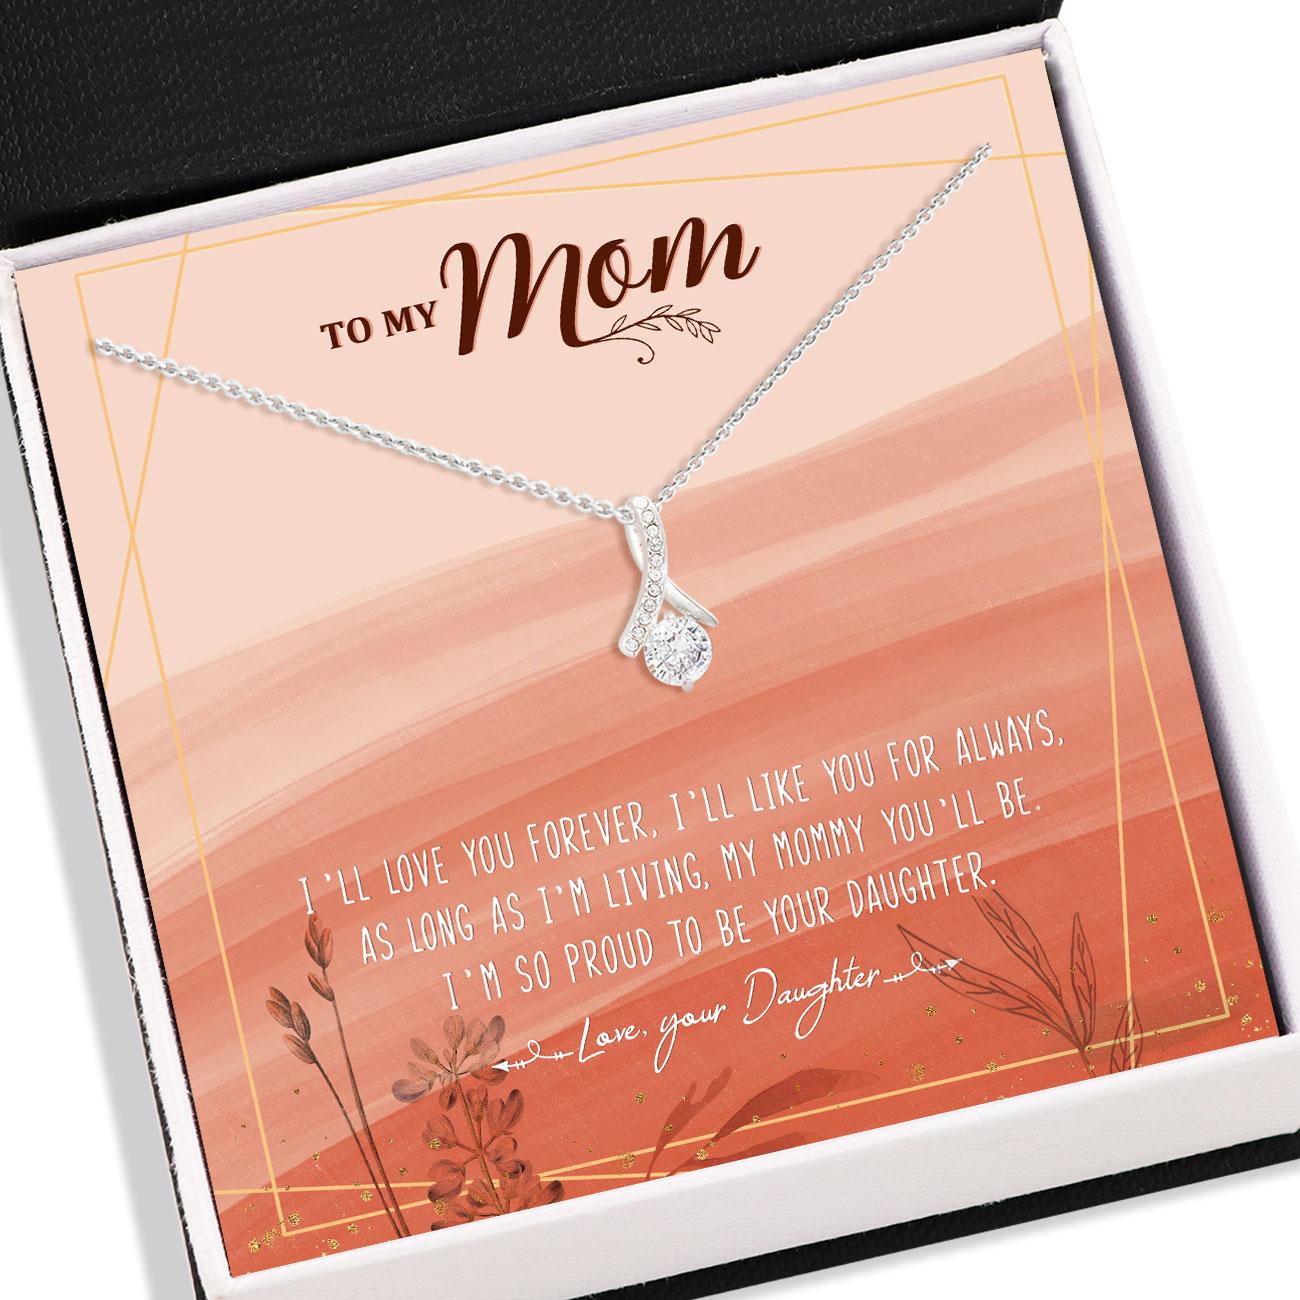 Mom Necklace, Daughter To Mom Necklace Card - Alluring Beauty Necklace, Jewelry Gifts For Mom V1